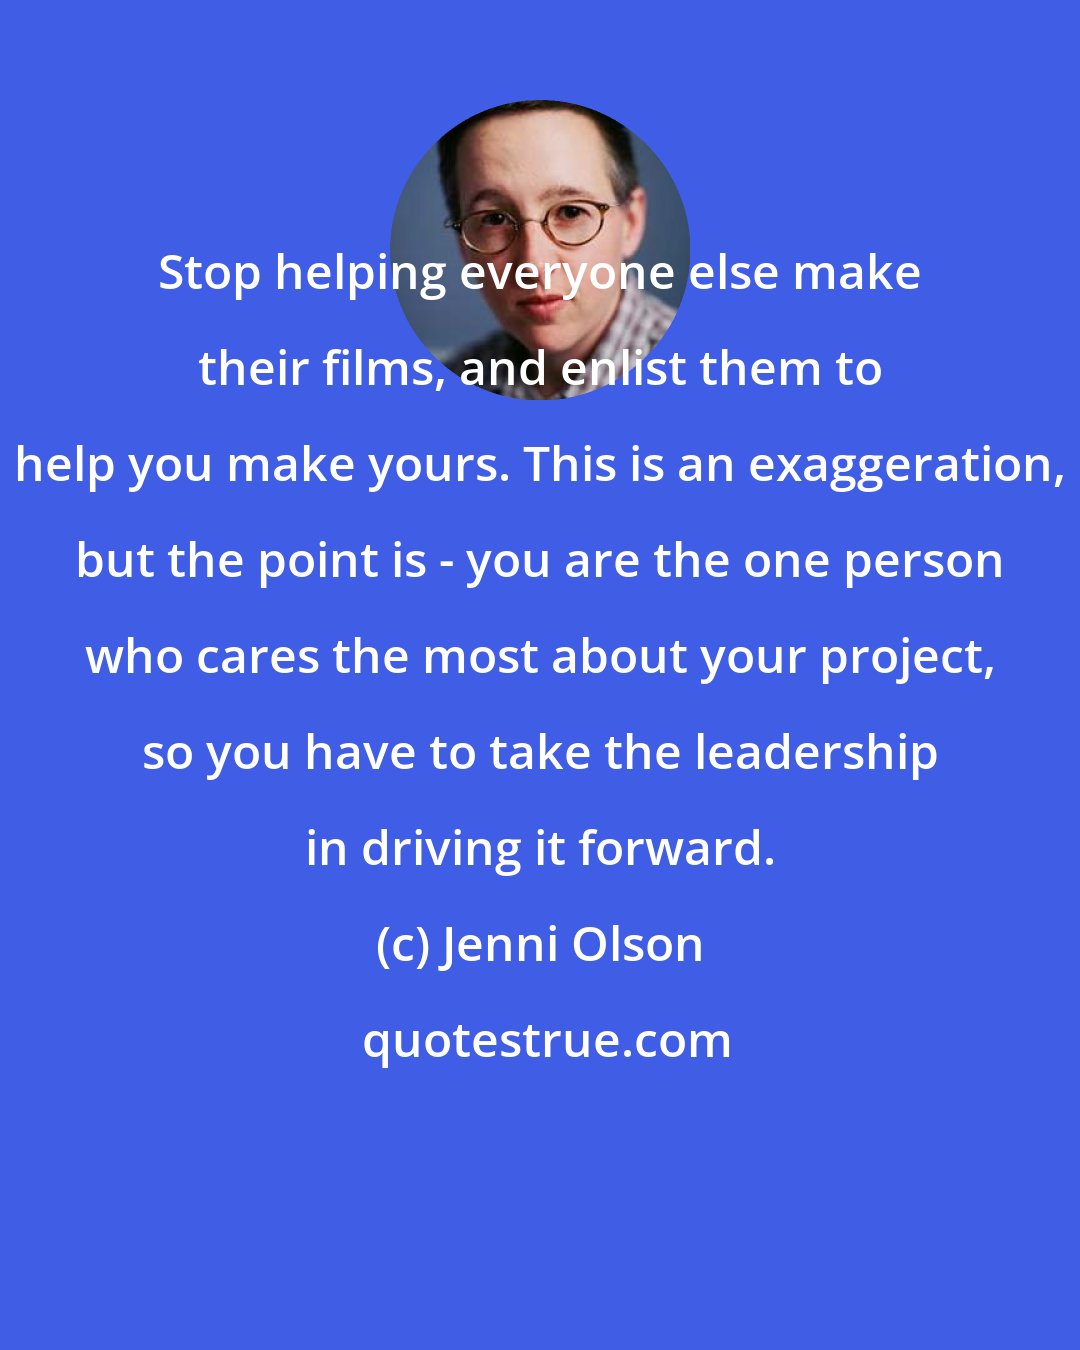 Jenni Olson: Stop helping everyone else make their films, and enlist them to help you make yours. This is an exaggeration, but the point is - you are the one person who cares the most about your project, so you have to take the leadership in driving it forward.